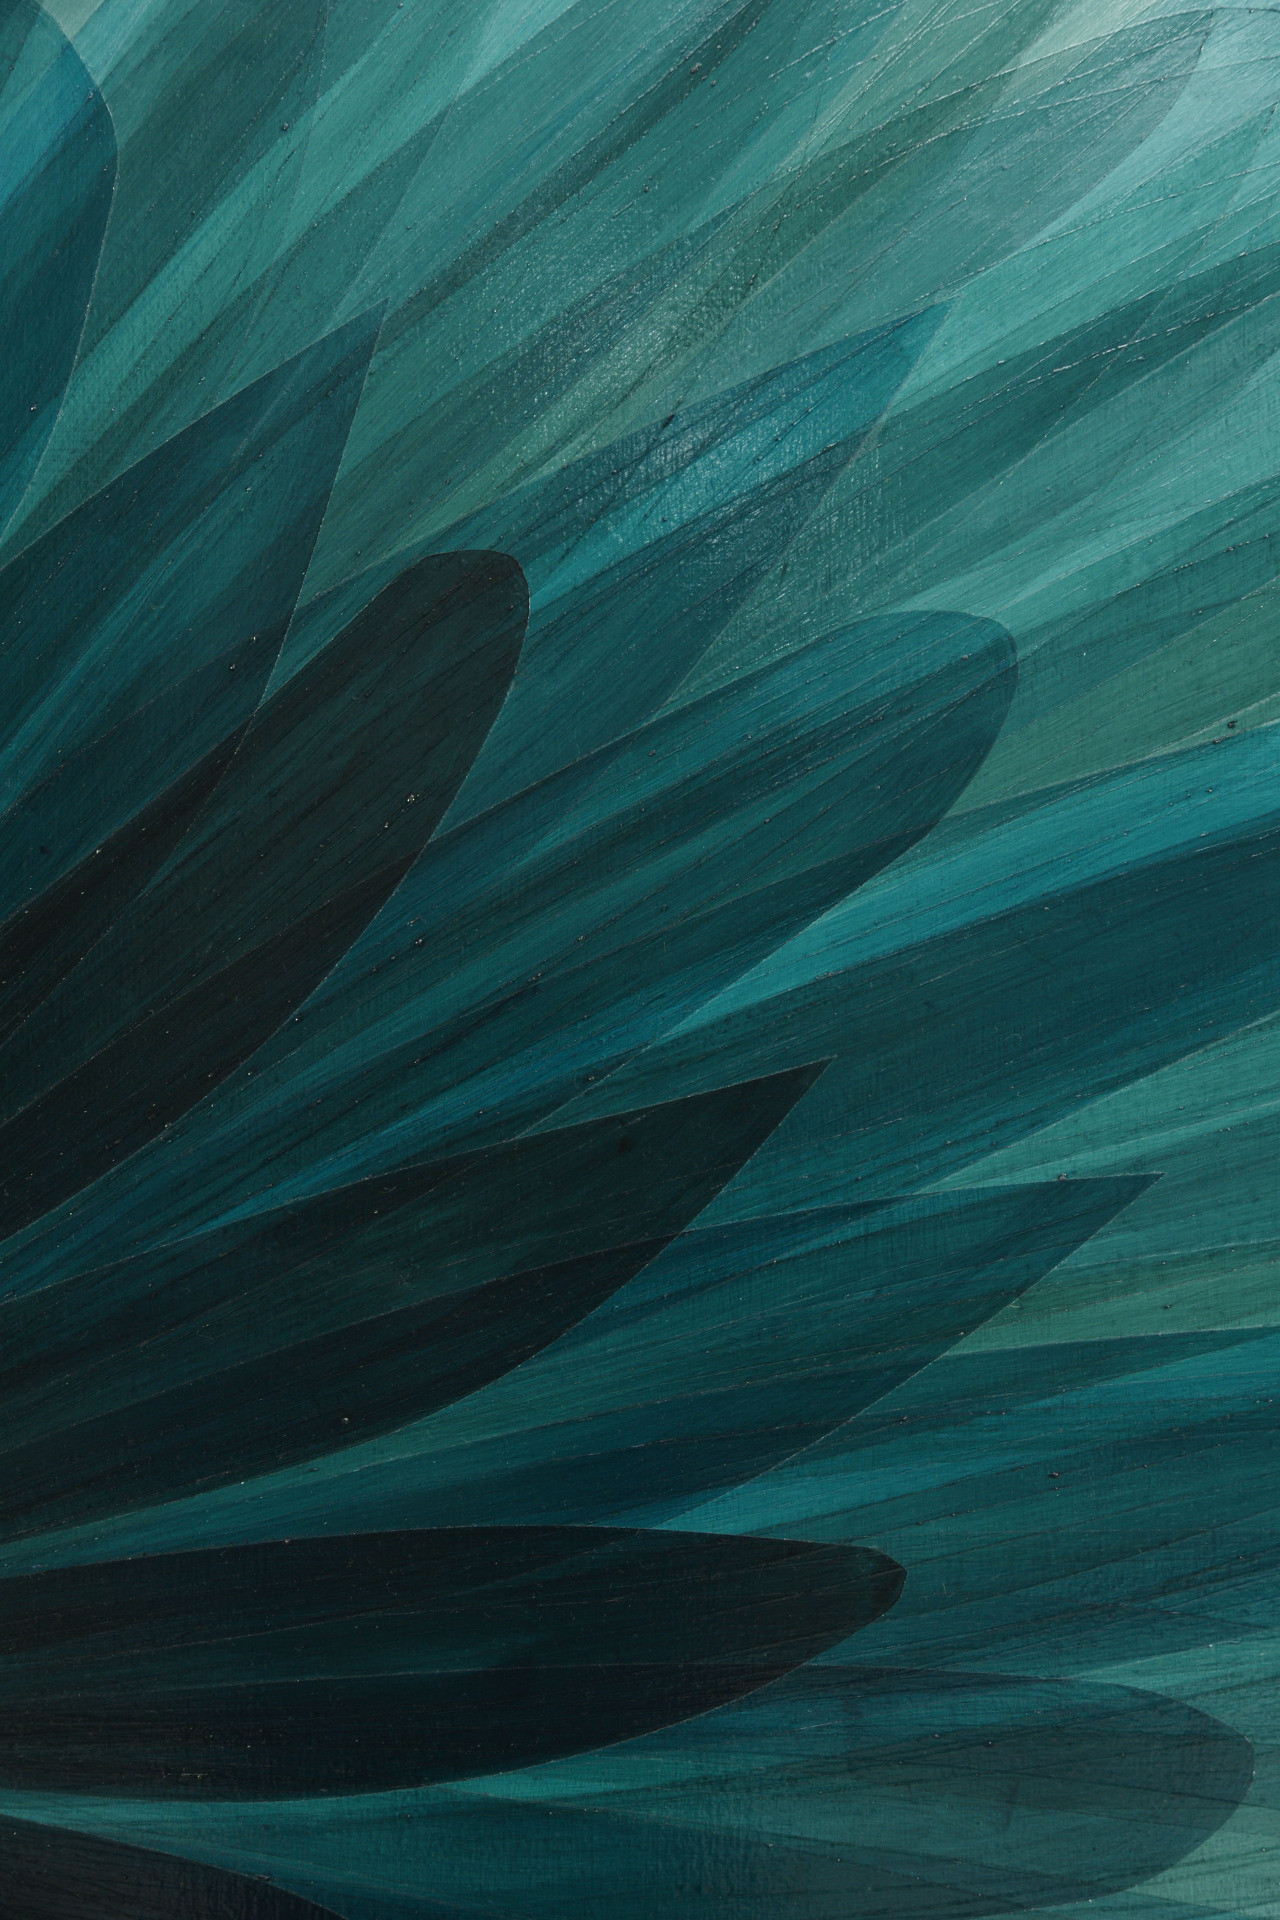 1280x1920 teal; Andre Ermolaev; pinned 11/3/15